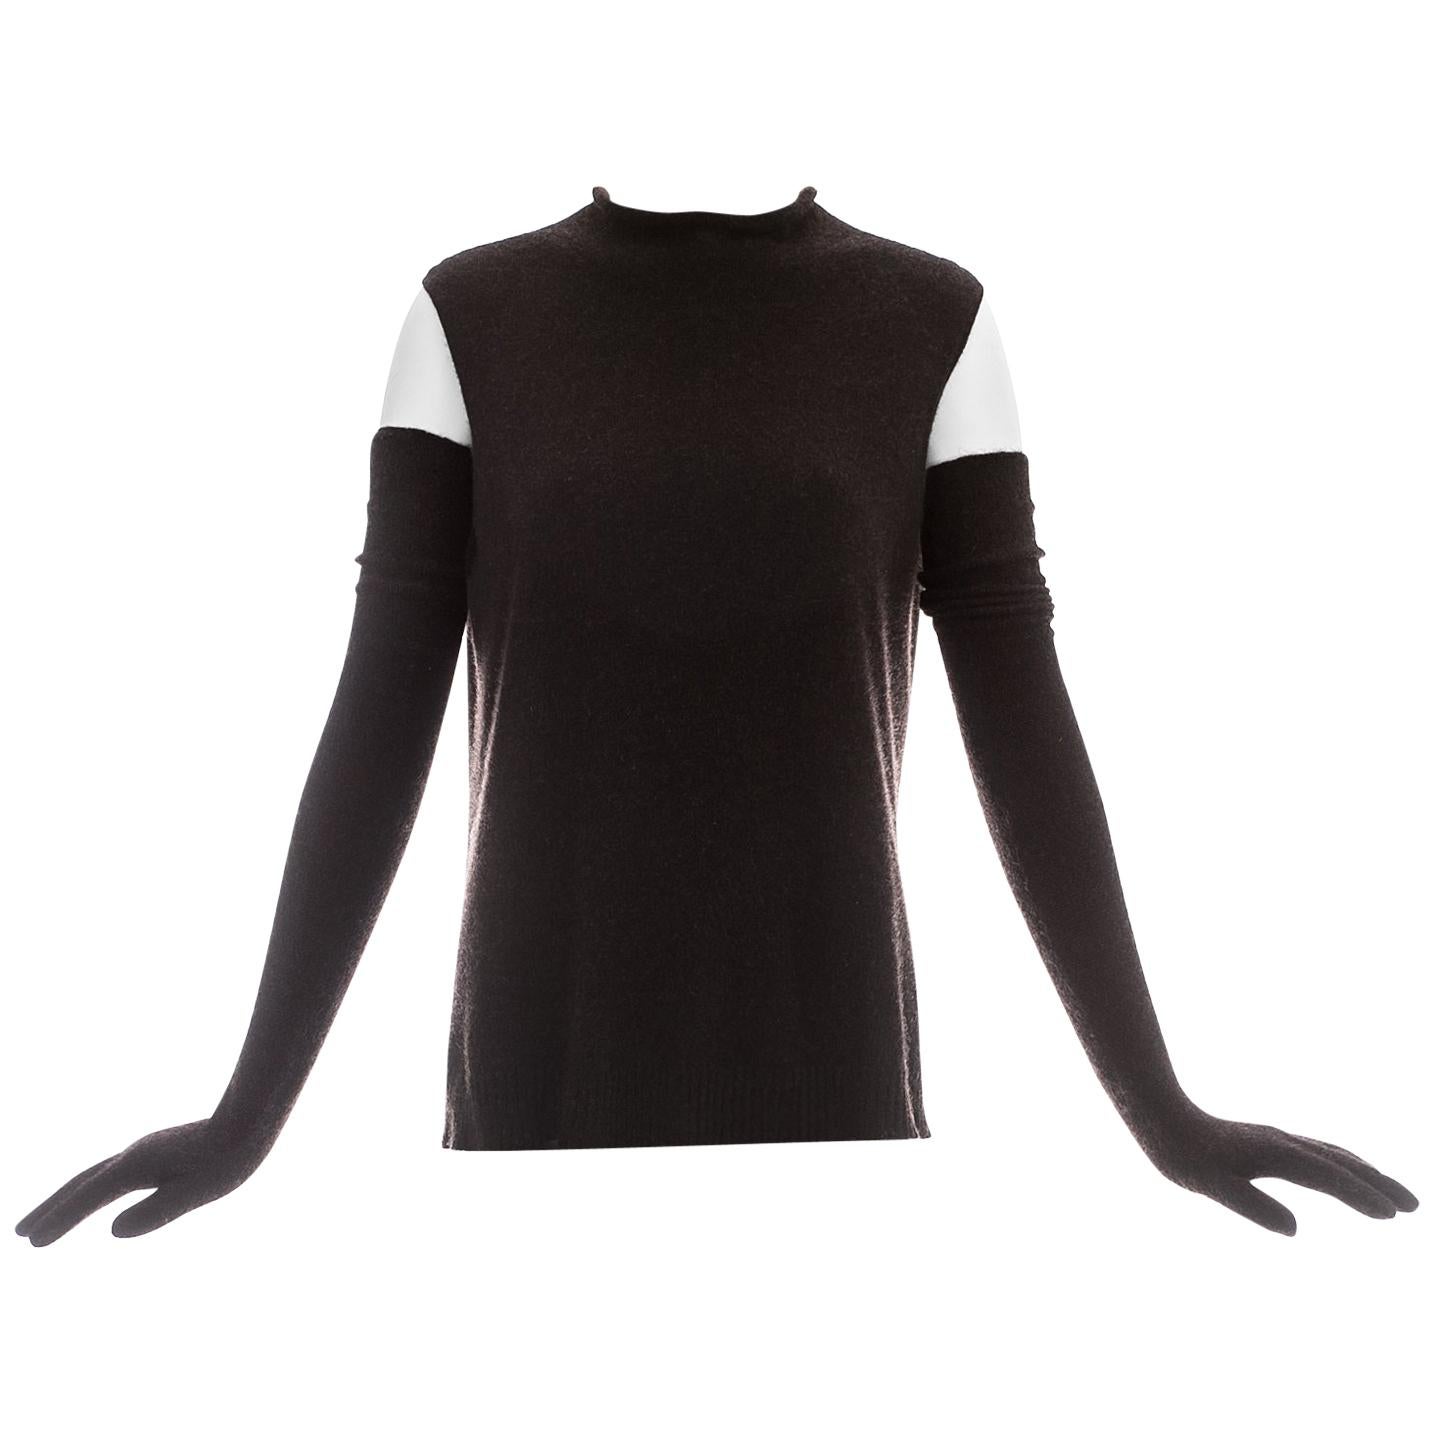 Hermes by Martin Margiela brown cashmere sweater vest and long gloves, ca. 2002 For Sale